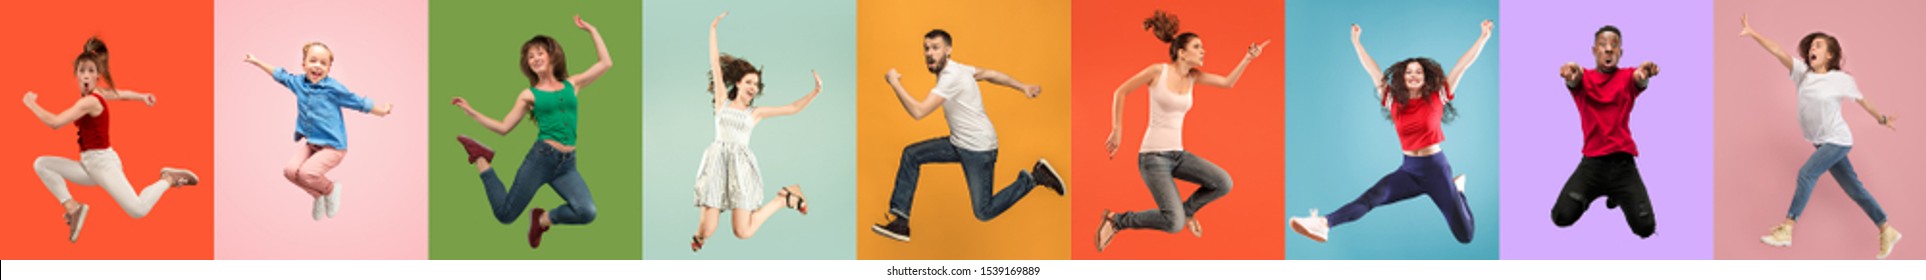 Young emotional people on multicolored backgrounds. Young surprised women jumping happy. Human emotions, facial expression concept, modern technologies. Trendy colors in collage. Made of 7 models. - Shutterstock ID 1539169889